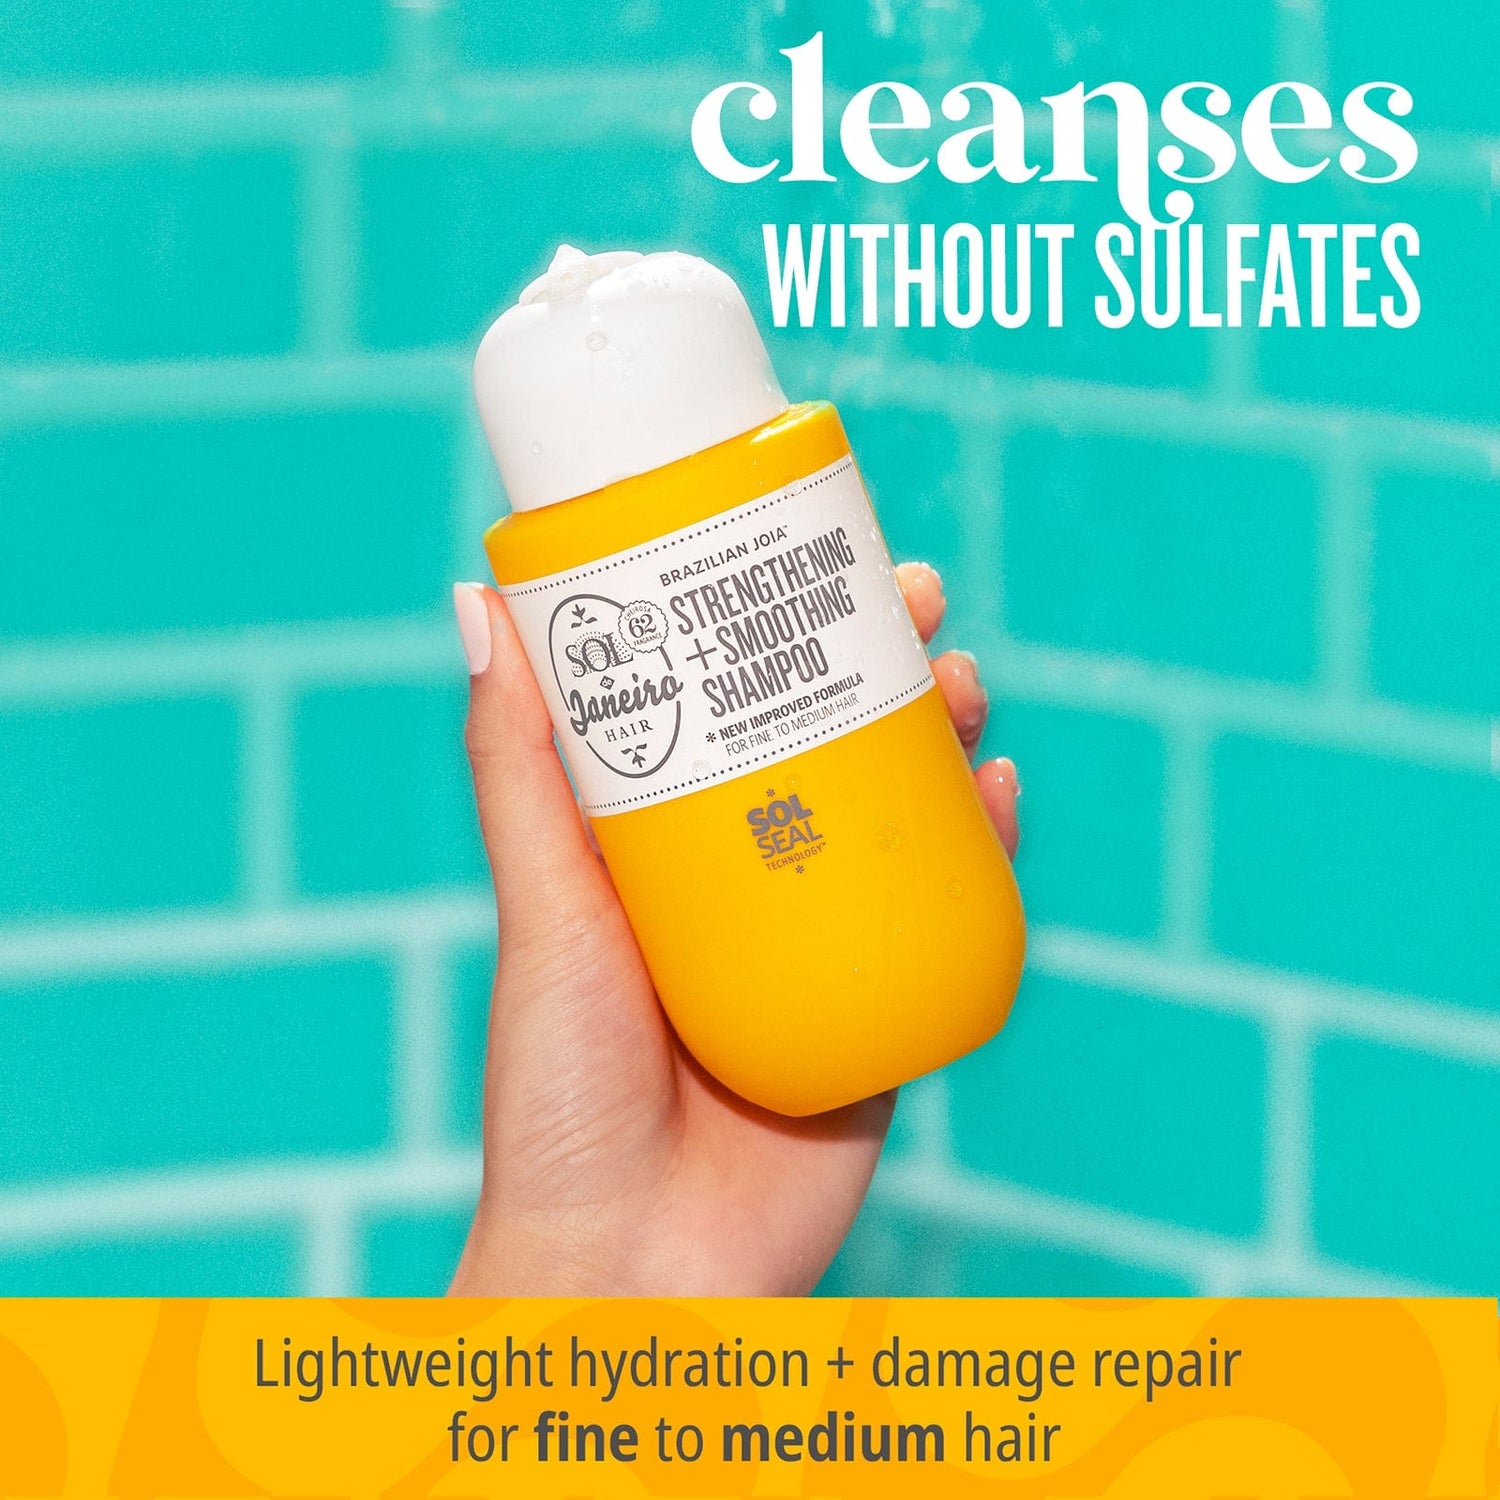 Weghtlessly Hydrates and repairs damage | Lightweight hydration and damage repair for fine to medium hair